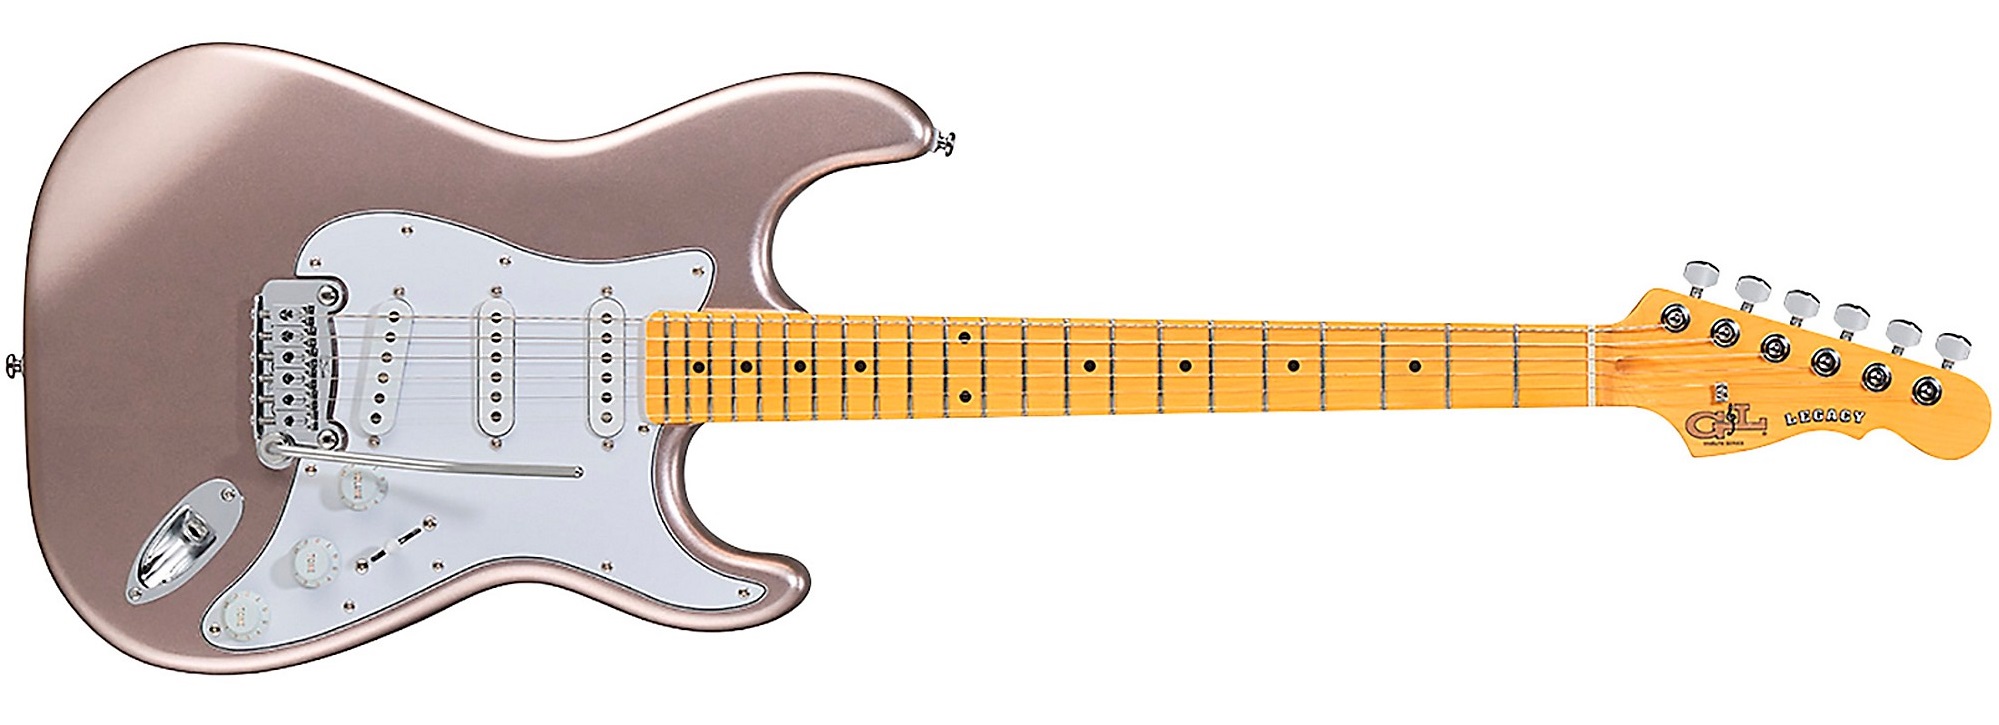 G&L Tribute Legacy Electric Guitar on a white background